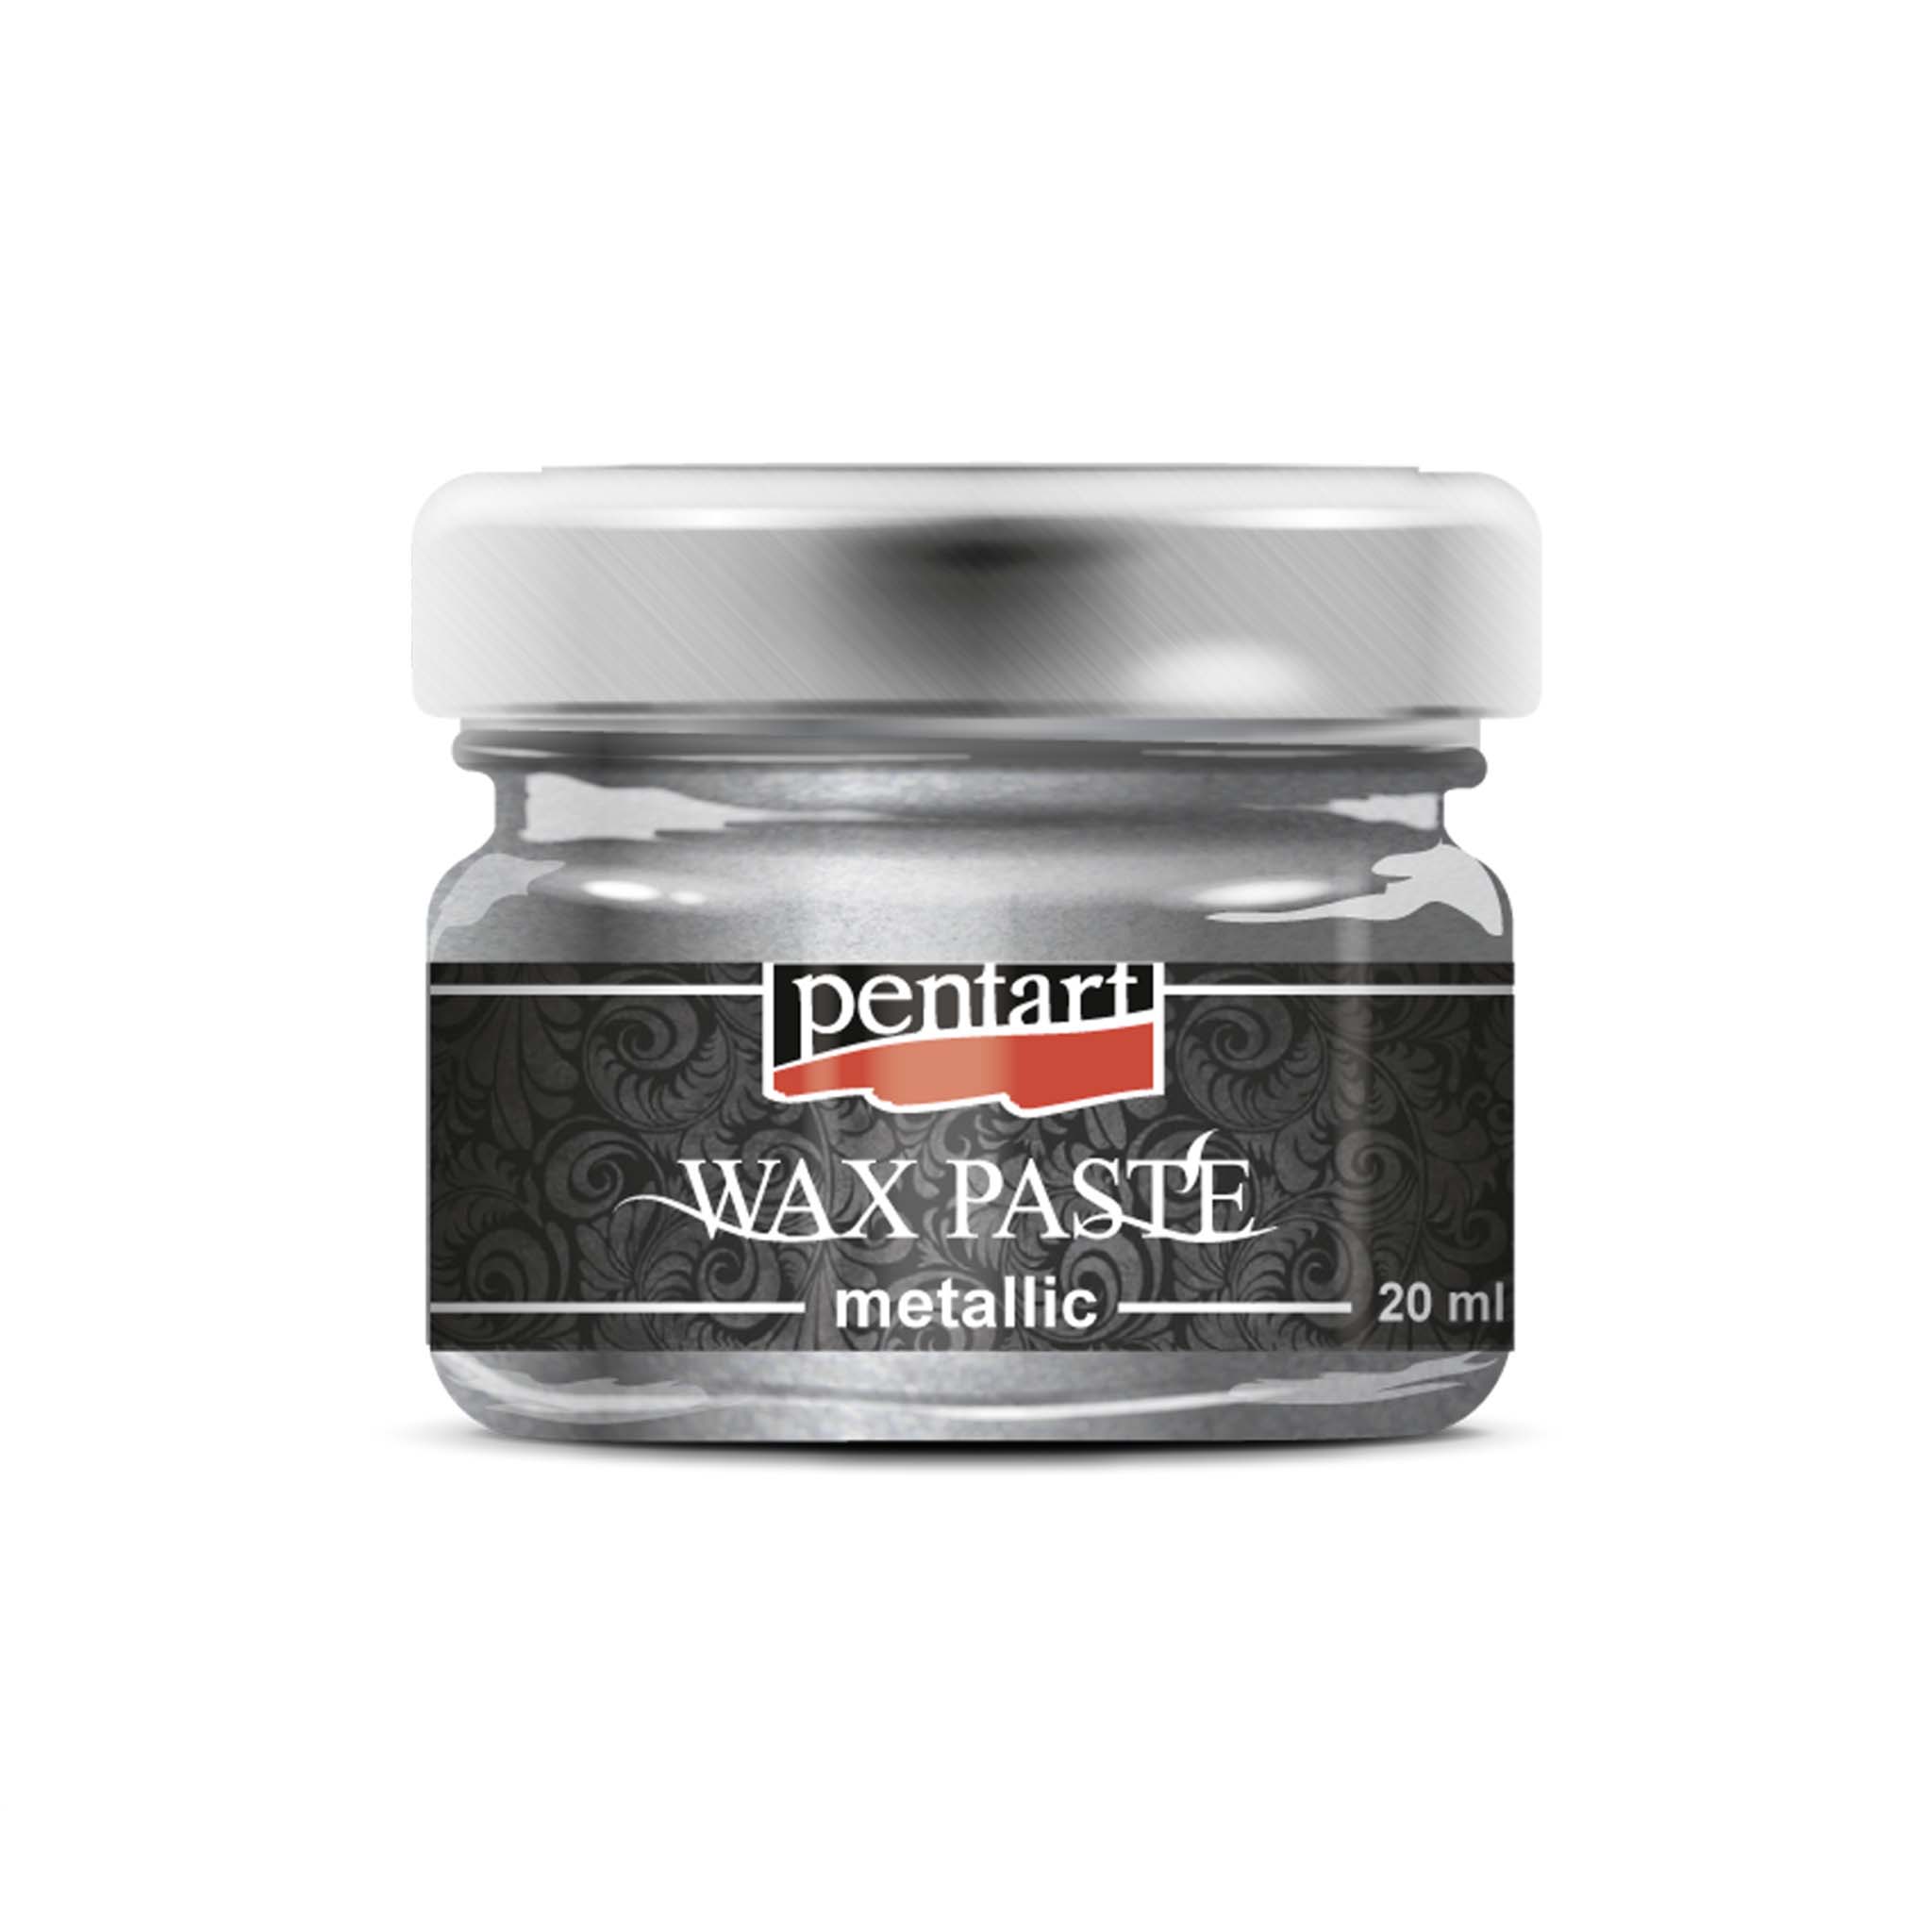 A jar of a 0.68 ounce jar of metallic silver wax paste by Pentart is against a white background.